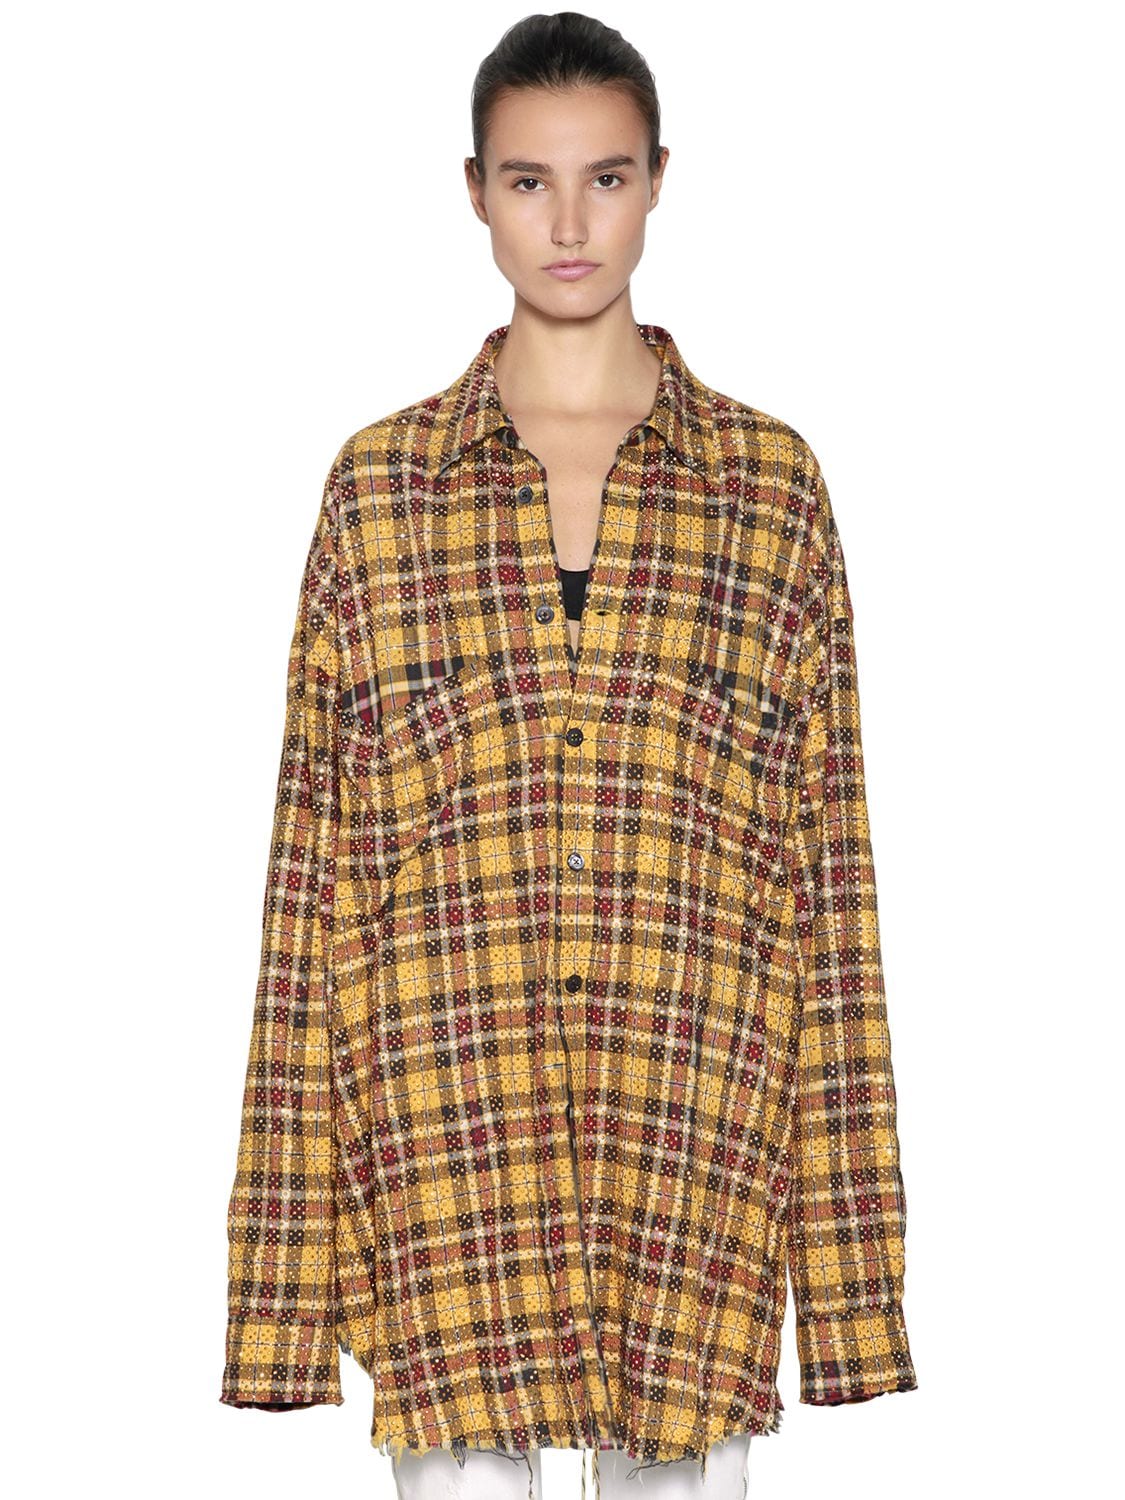 FAITH CONNEXION OVERSIZE STUDDED CHECK COTTON SHIRT,67ID5G009-NZAW0